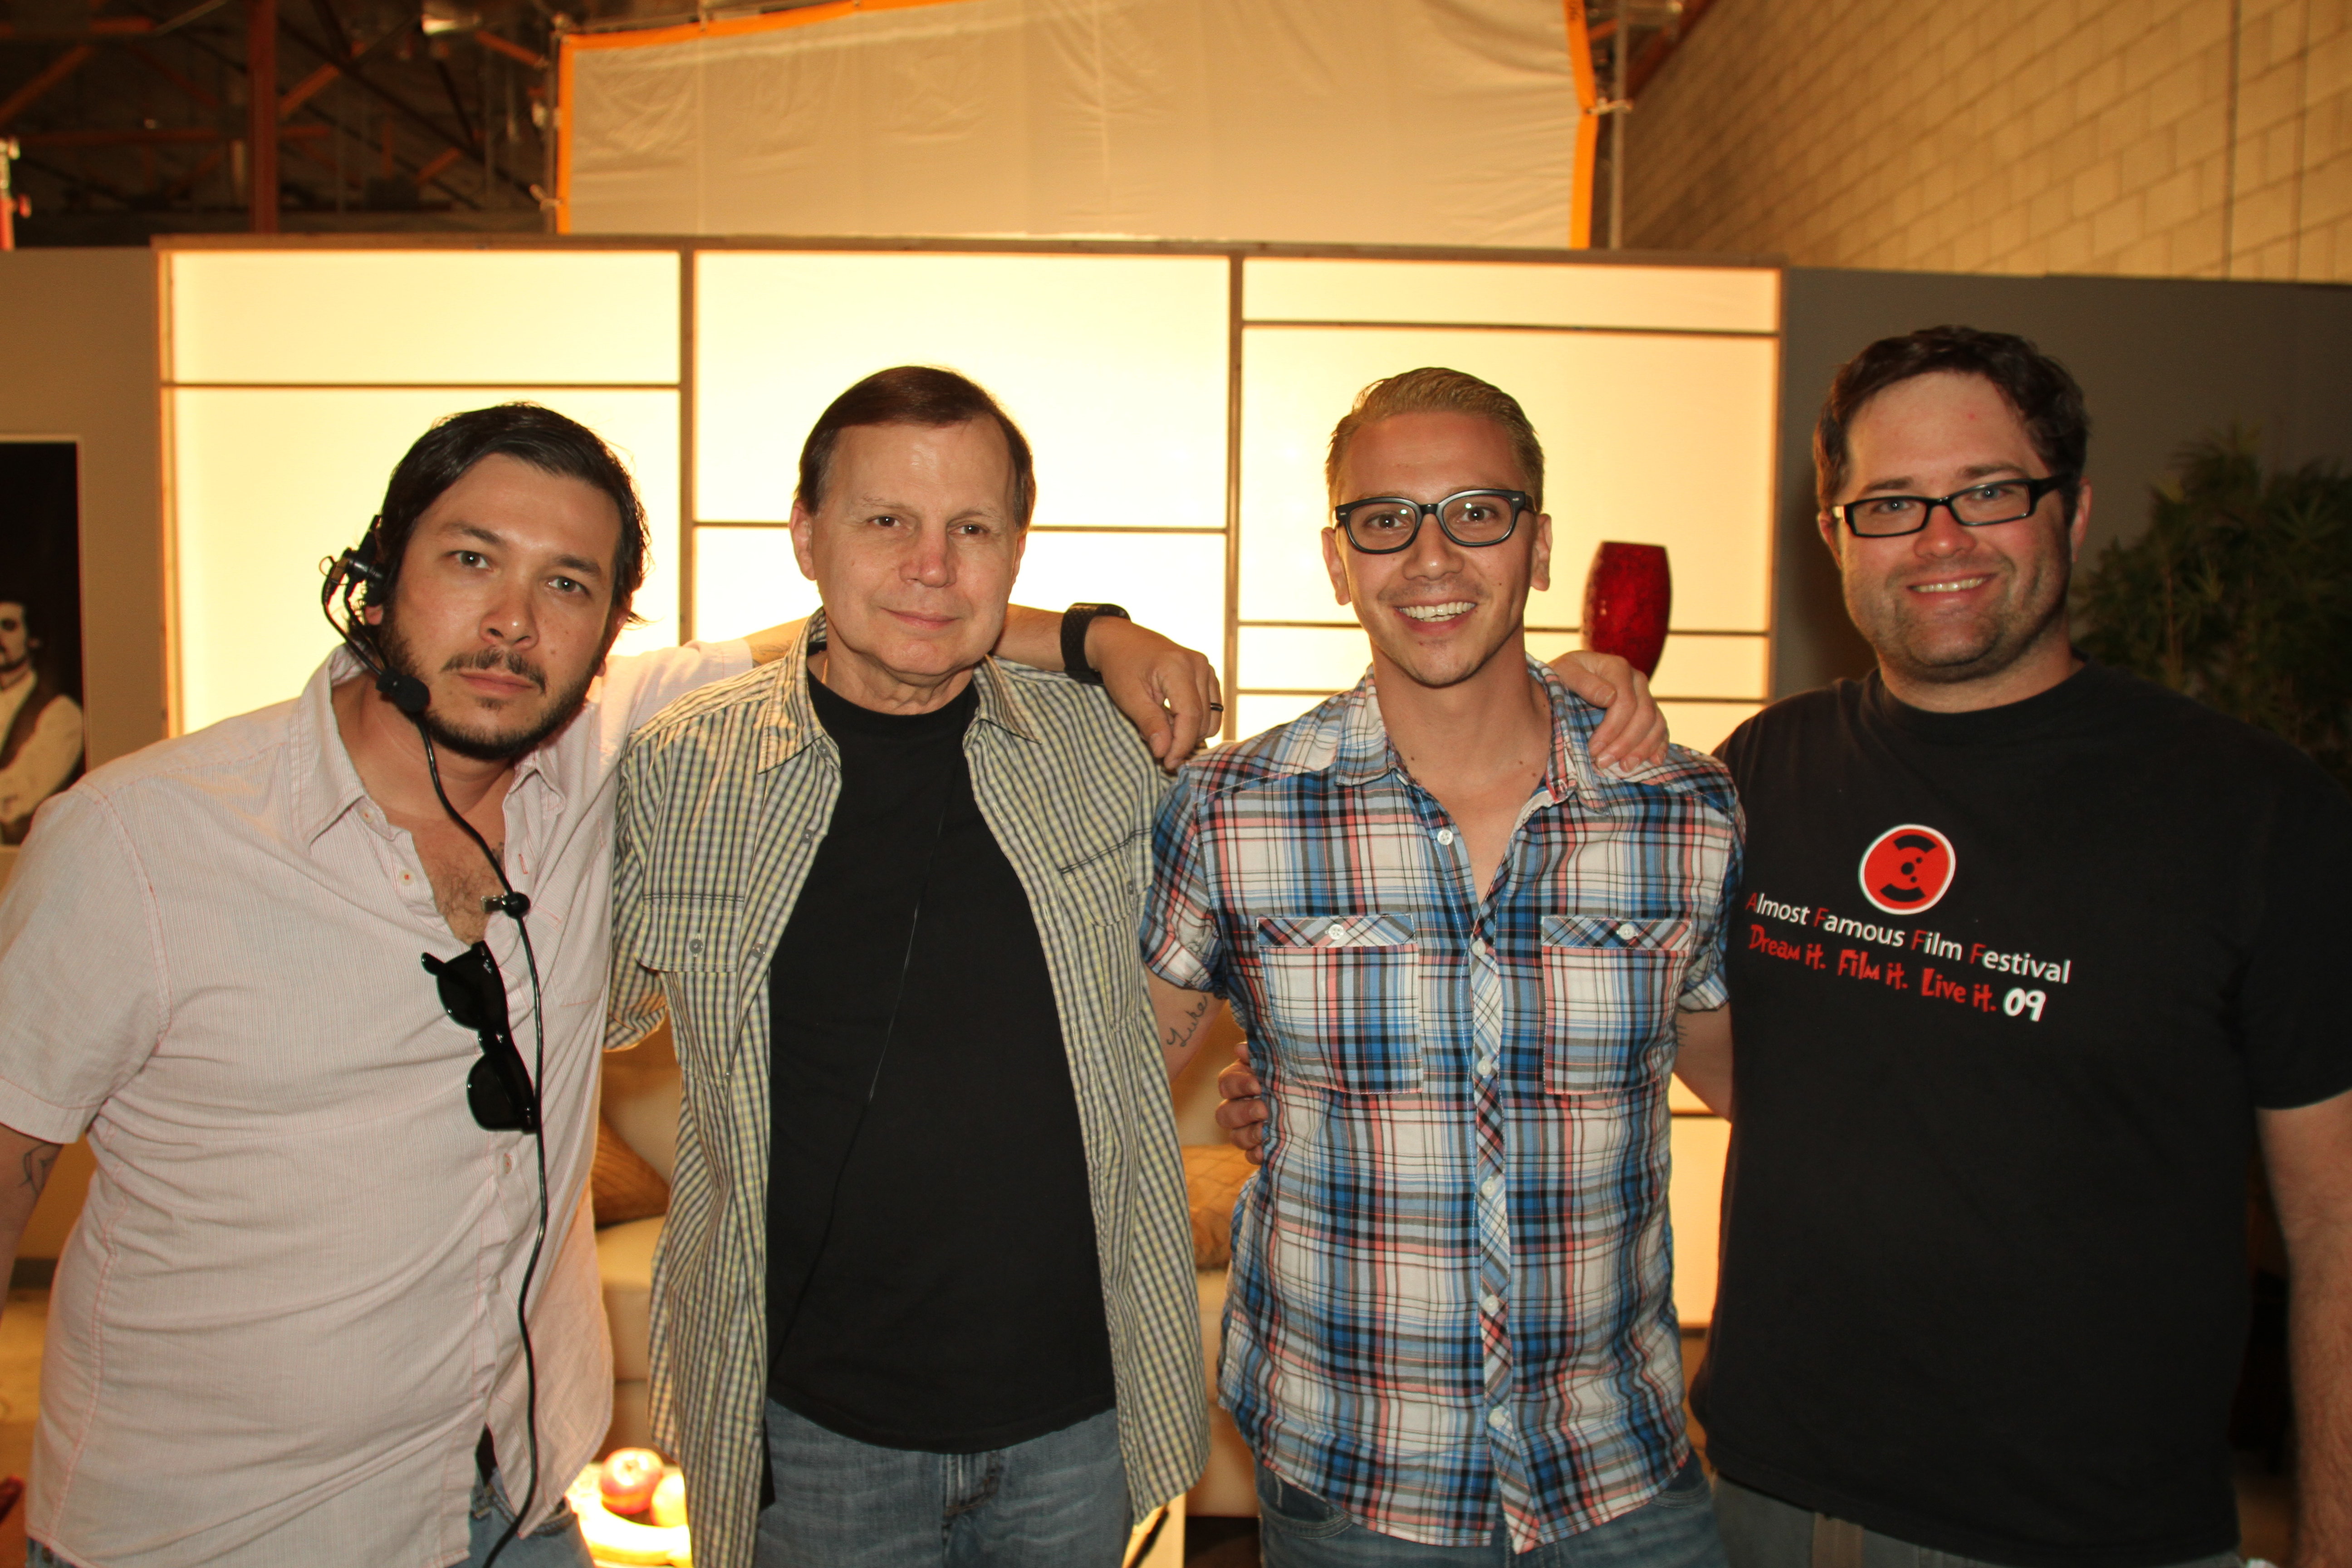 DIRTY LITTLE TRICK Producers Brian Ronalds, Michael Z. Gordon and Dean Ronalds with Director Brian Skiba